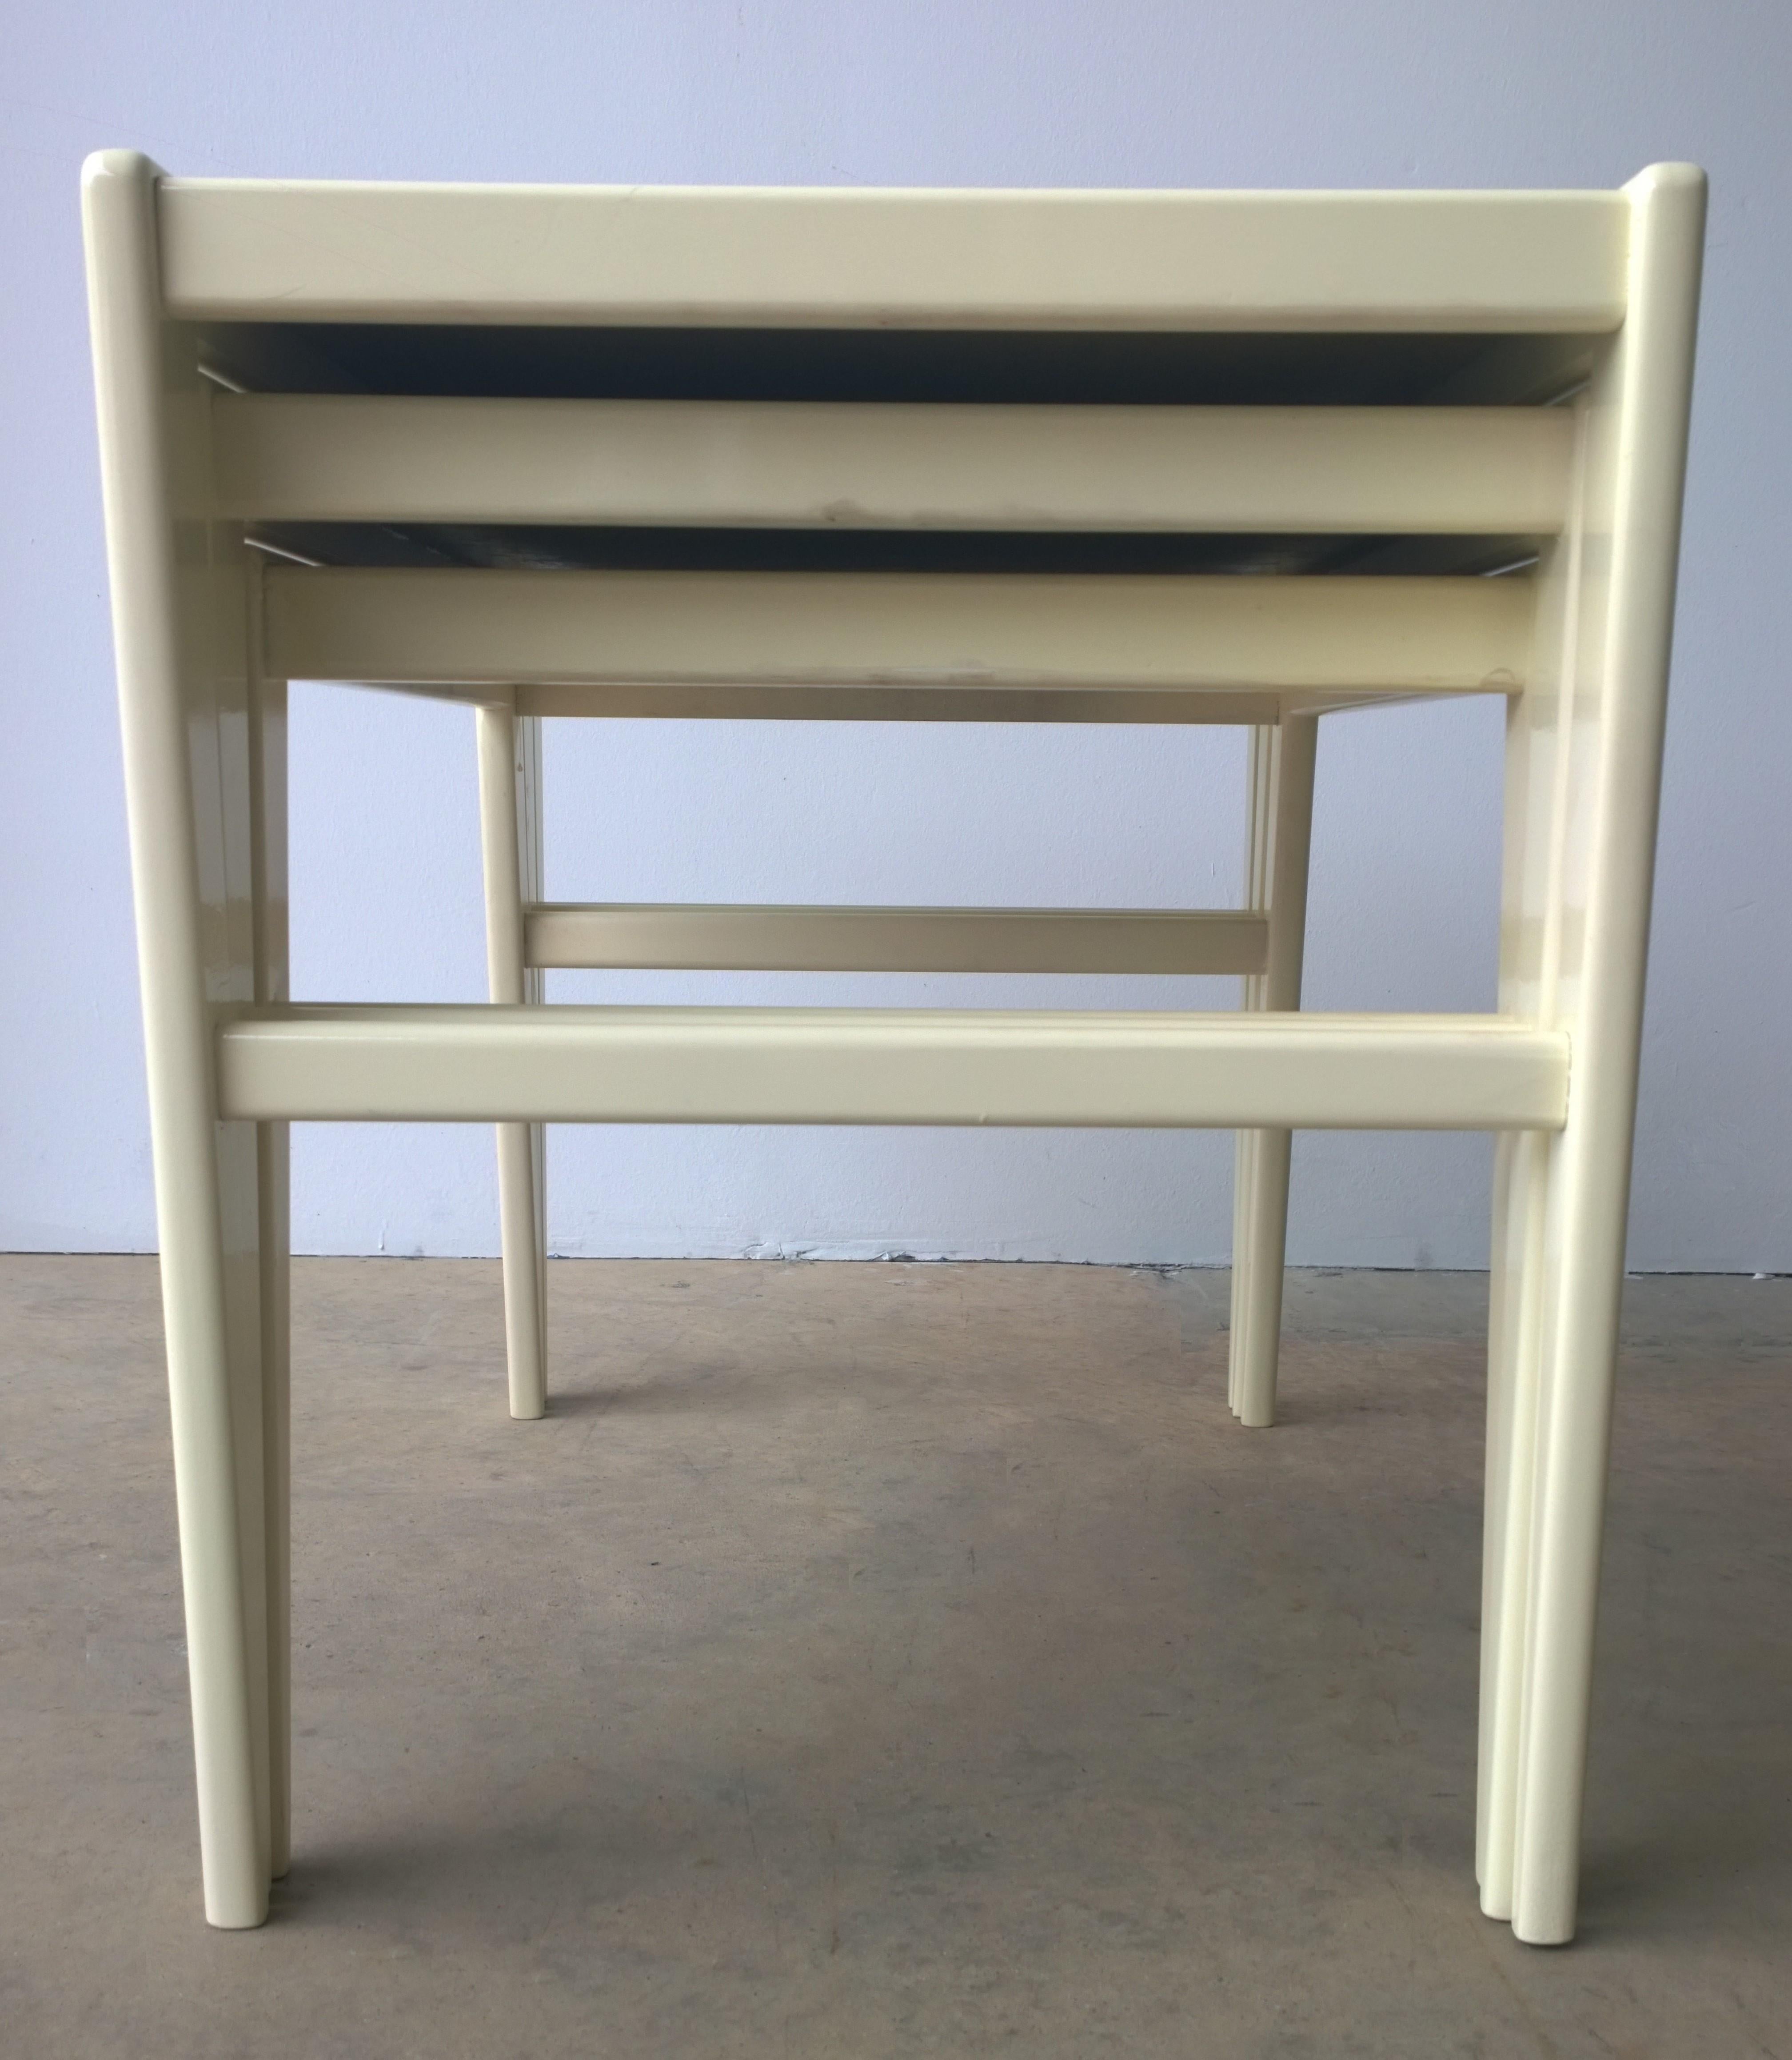 20th Century Ico Parisi / Singer & Son New Lacquer in Creamy White Wood S/3 Stacking Tables For Sale